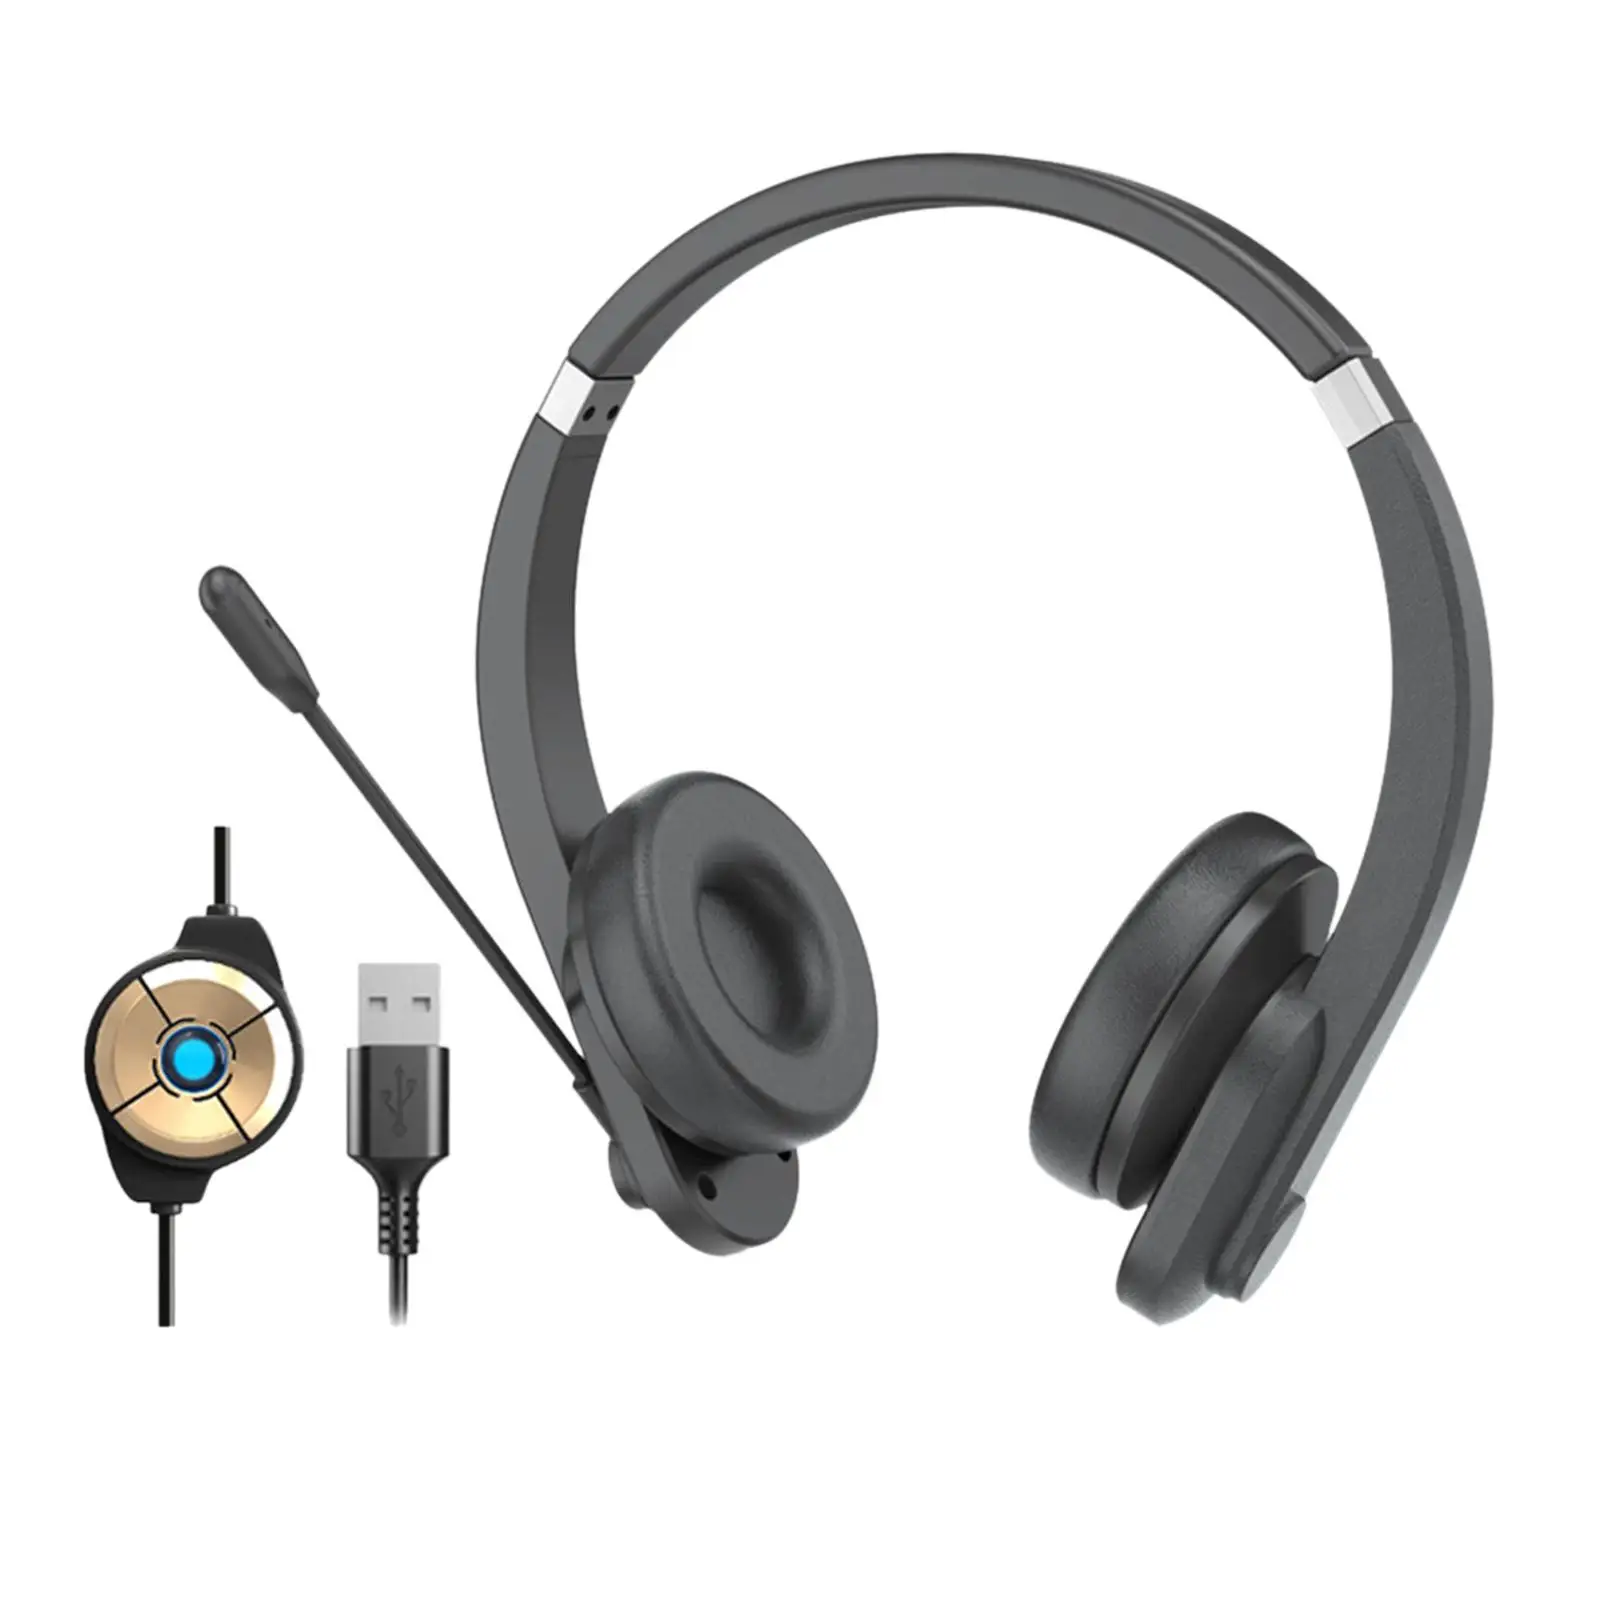 Oy632 Bluetooth Headset Handsfree with Mic Noise Cancelling Soft Ear Cups Wireless Headset for Call Center Computer Office Home